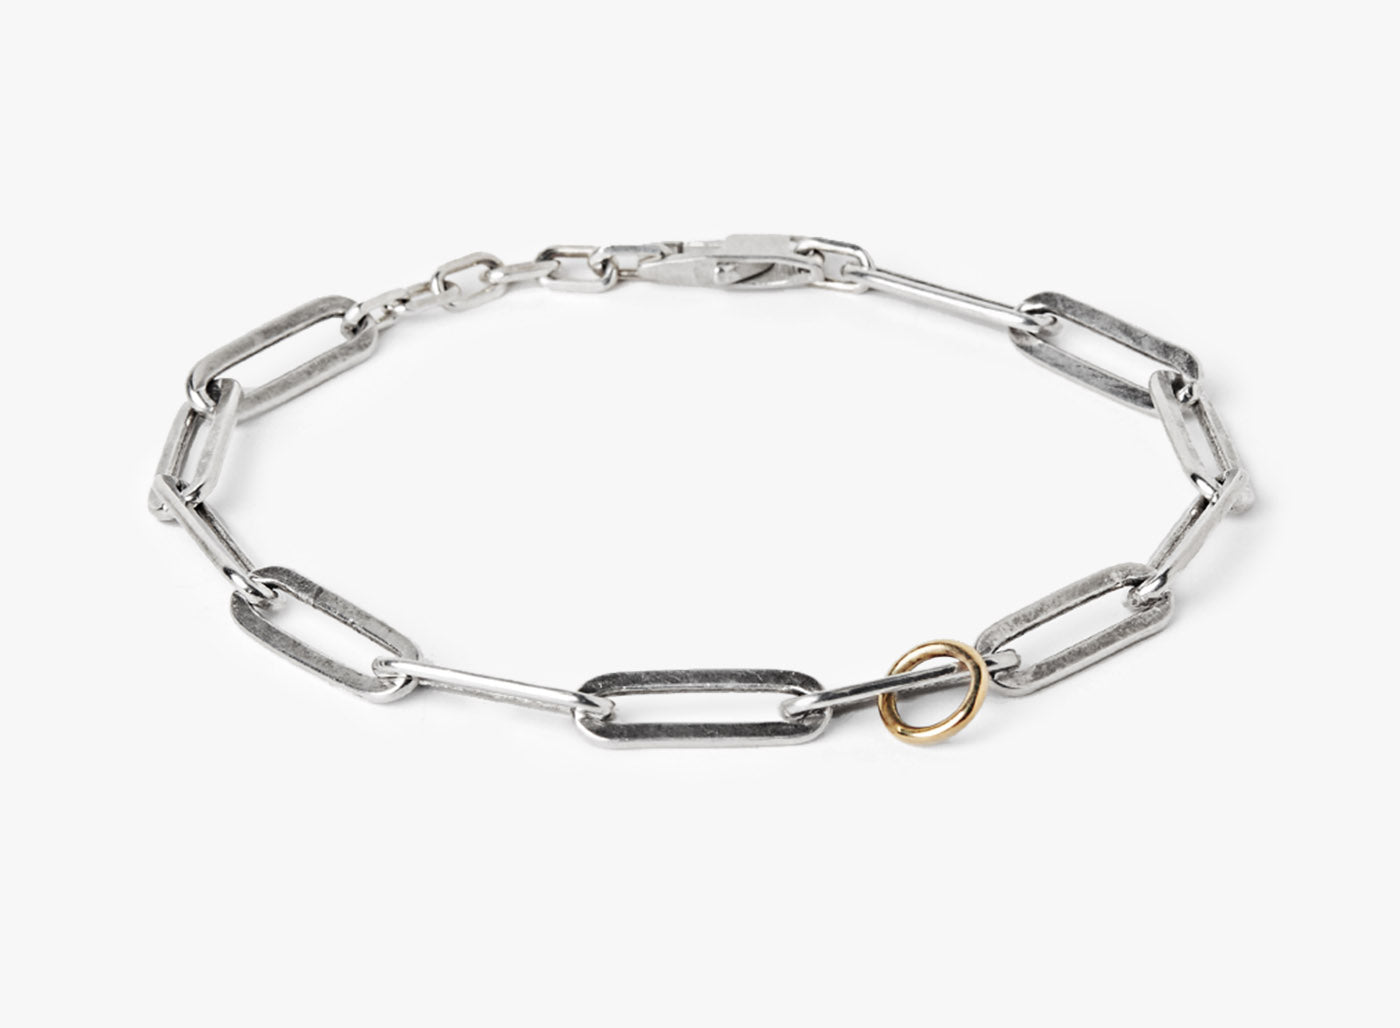 MIXED METAL BRACELET 376: this adjustable sterling paperclip chain bracelet is finished with a solid 18K gold ring